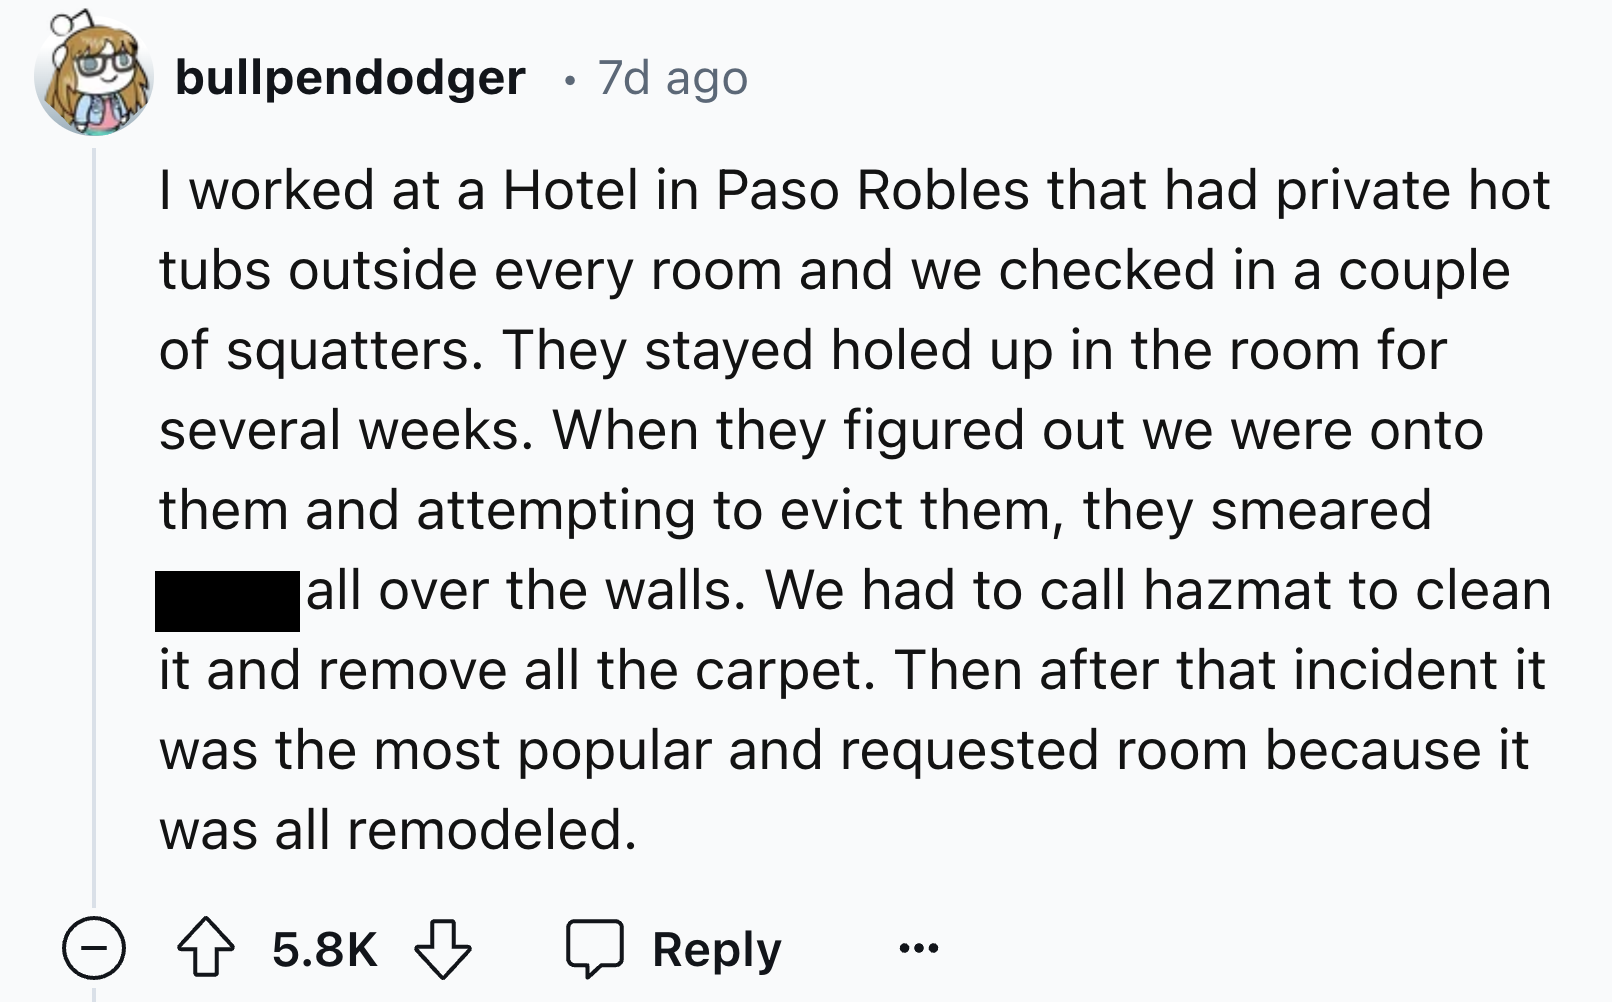 screenshot - bullpendodger 7d ago I worked at a Hotel in Paso Robles that had private hot tubs outside every room and we checked in a couple of squatters. They stayed holed up in the room for several weeks. When they figured out we were onto them and atte